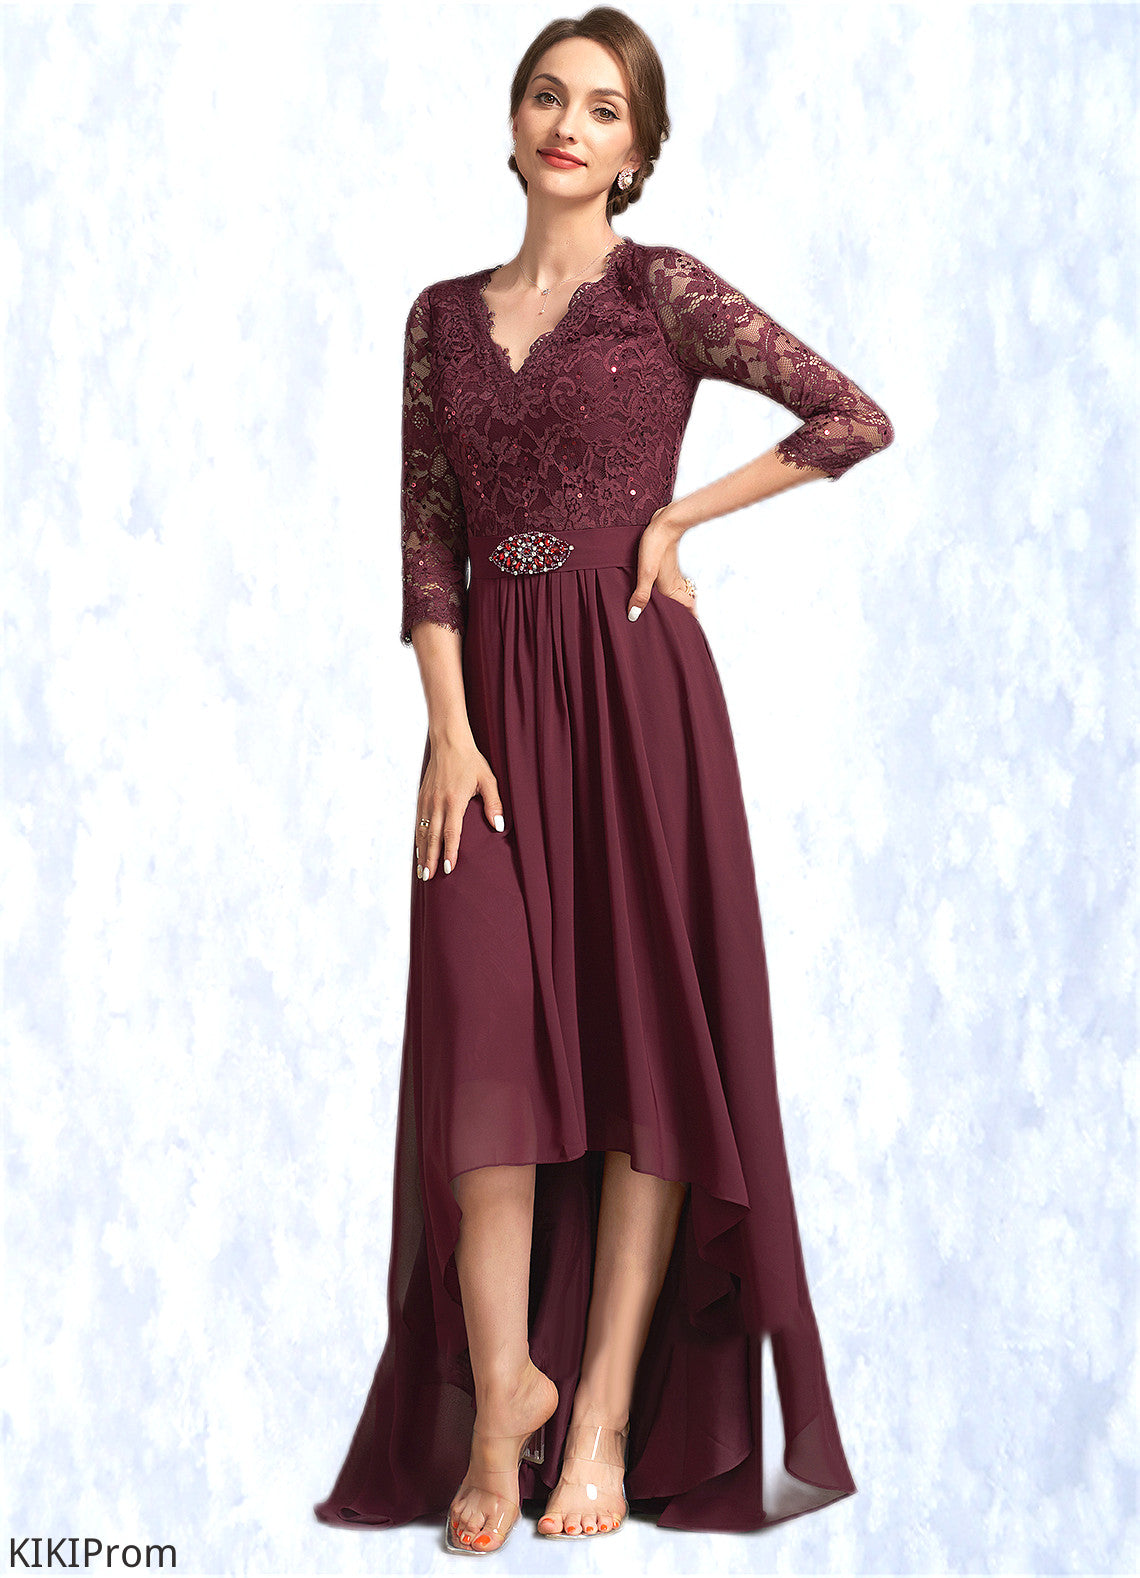 Patti A-Line V-neck Asymmetrical Chiffon Lace Mother of the Bride Dress With Beading Sequins DZ126P0014980